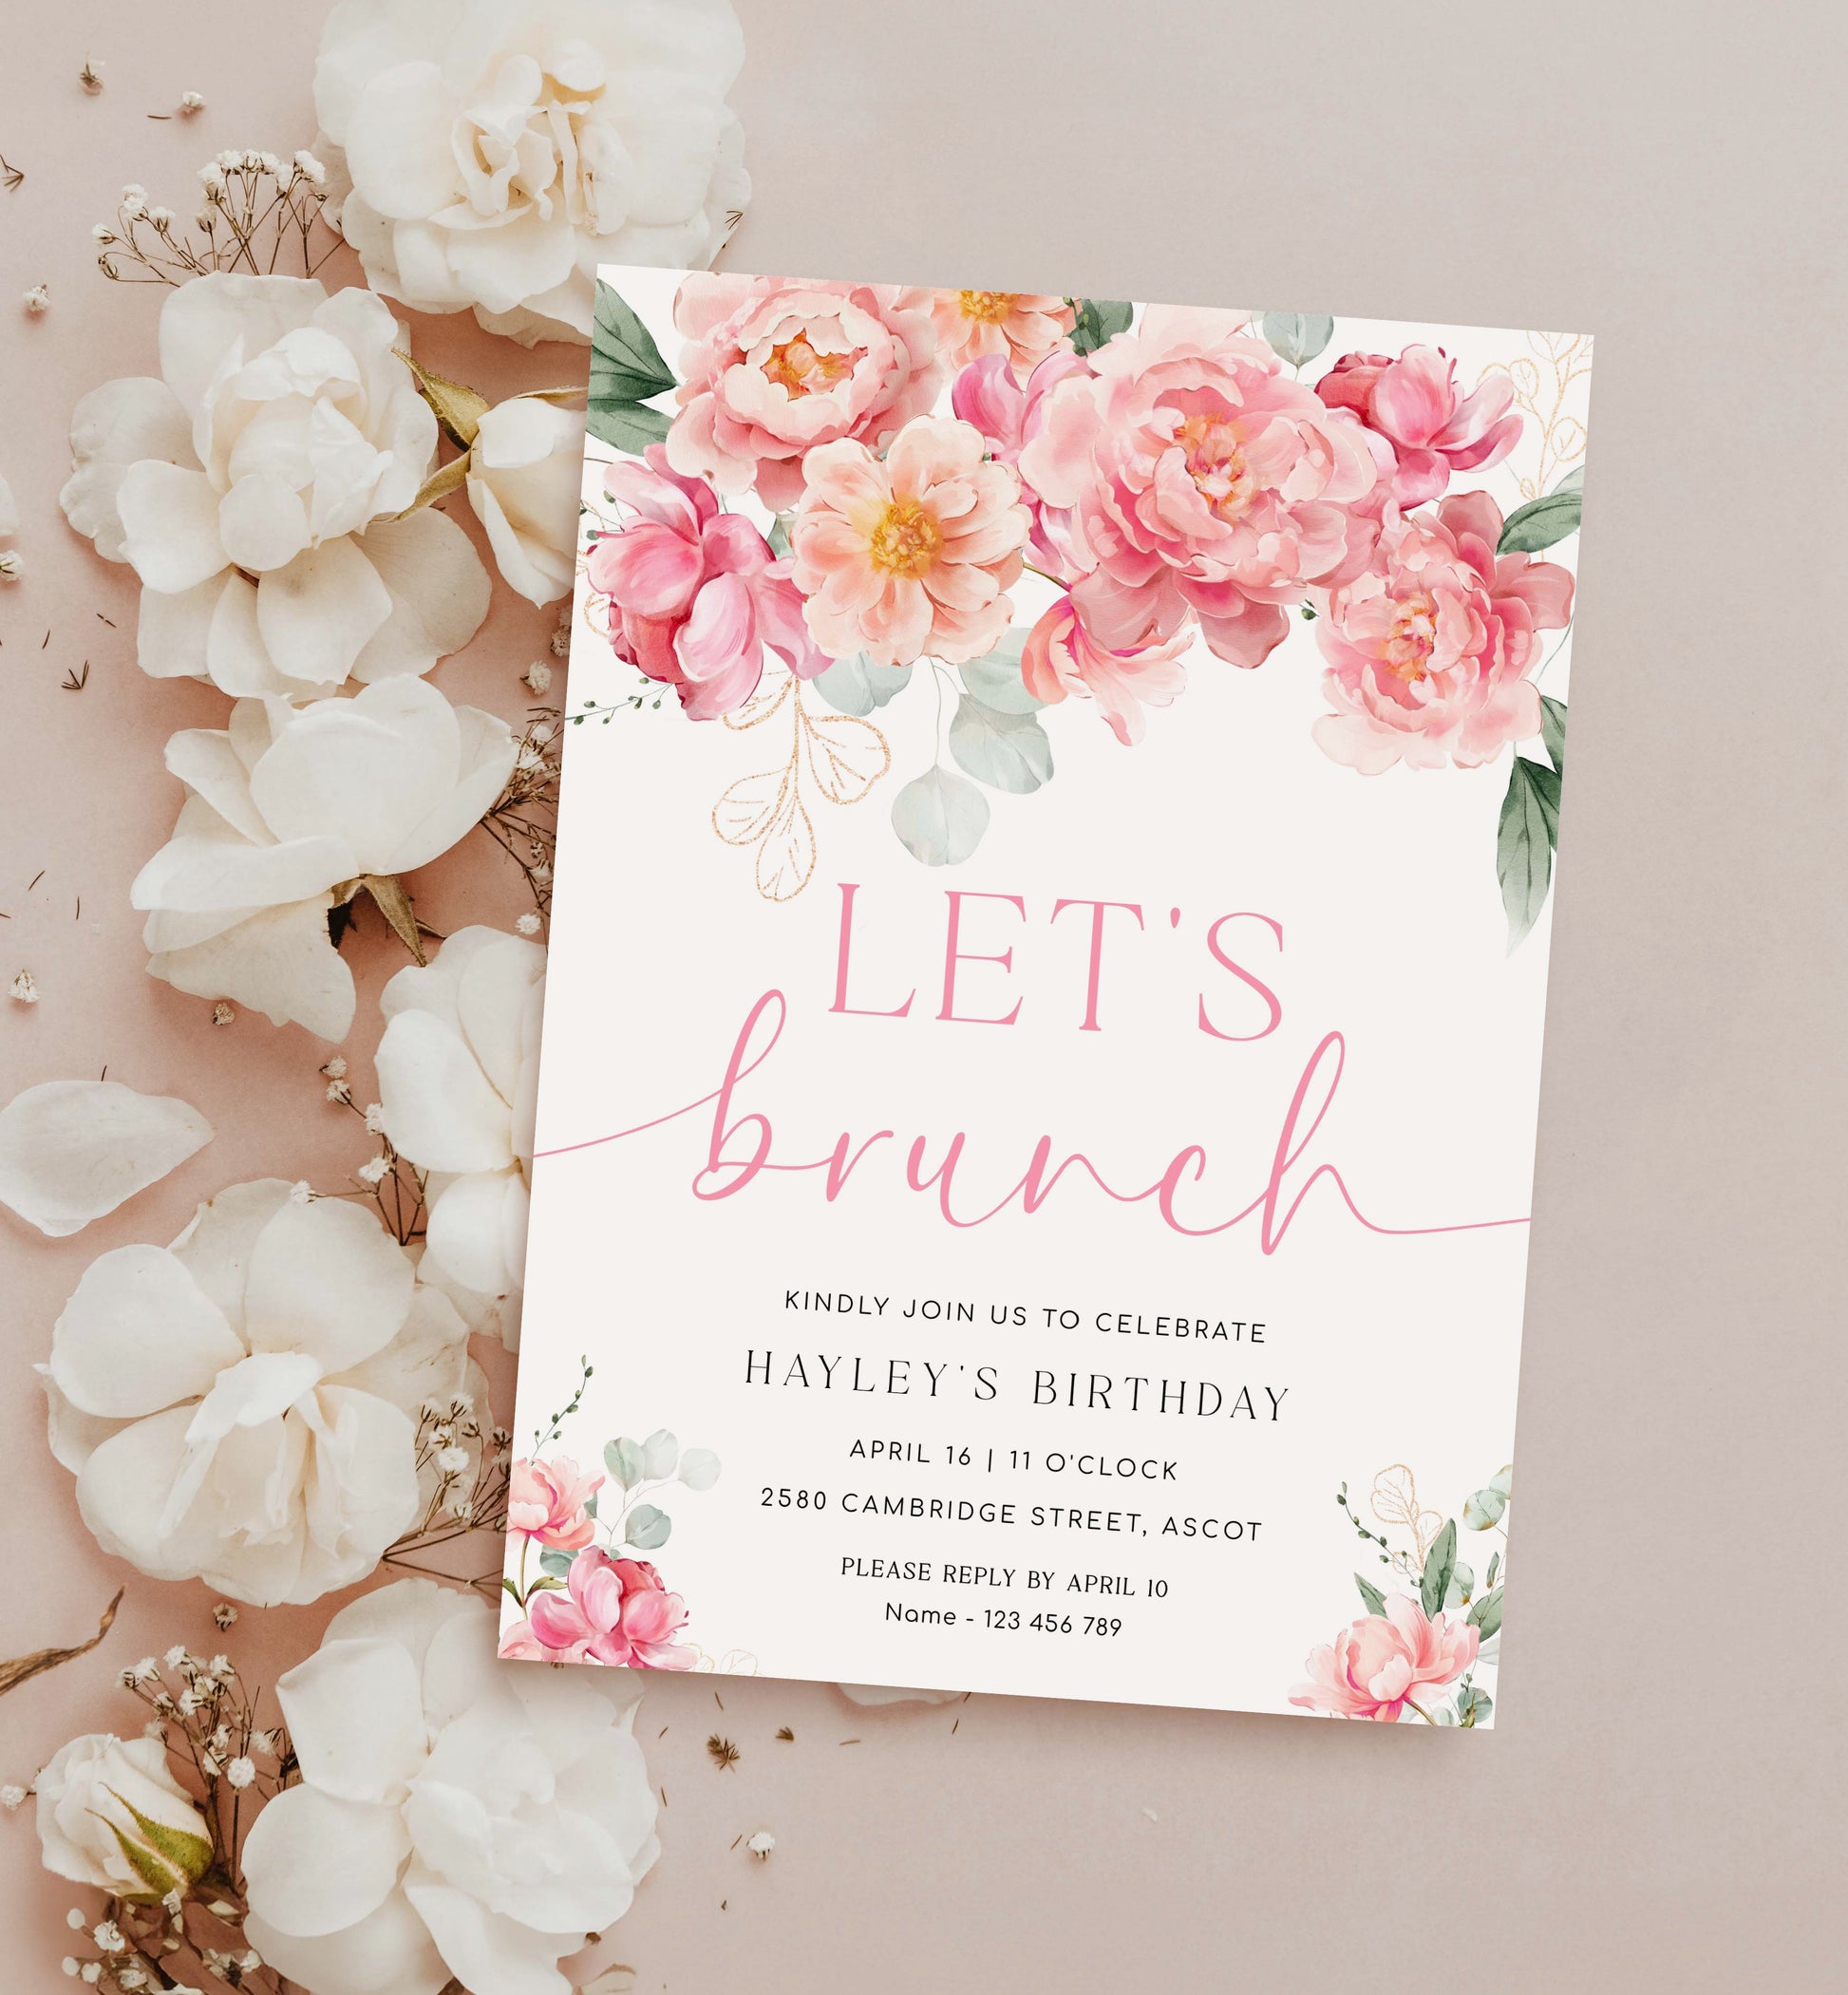 Let's Brunch Invite, Pink Peony Floral Birthday Brunch Party Invite, Printable Girls Birthday Party Invite, Ladies Lunch Invite, Piper